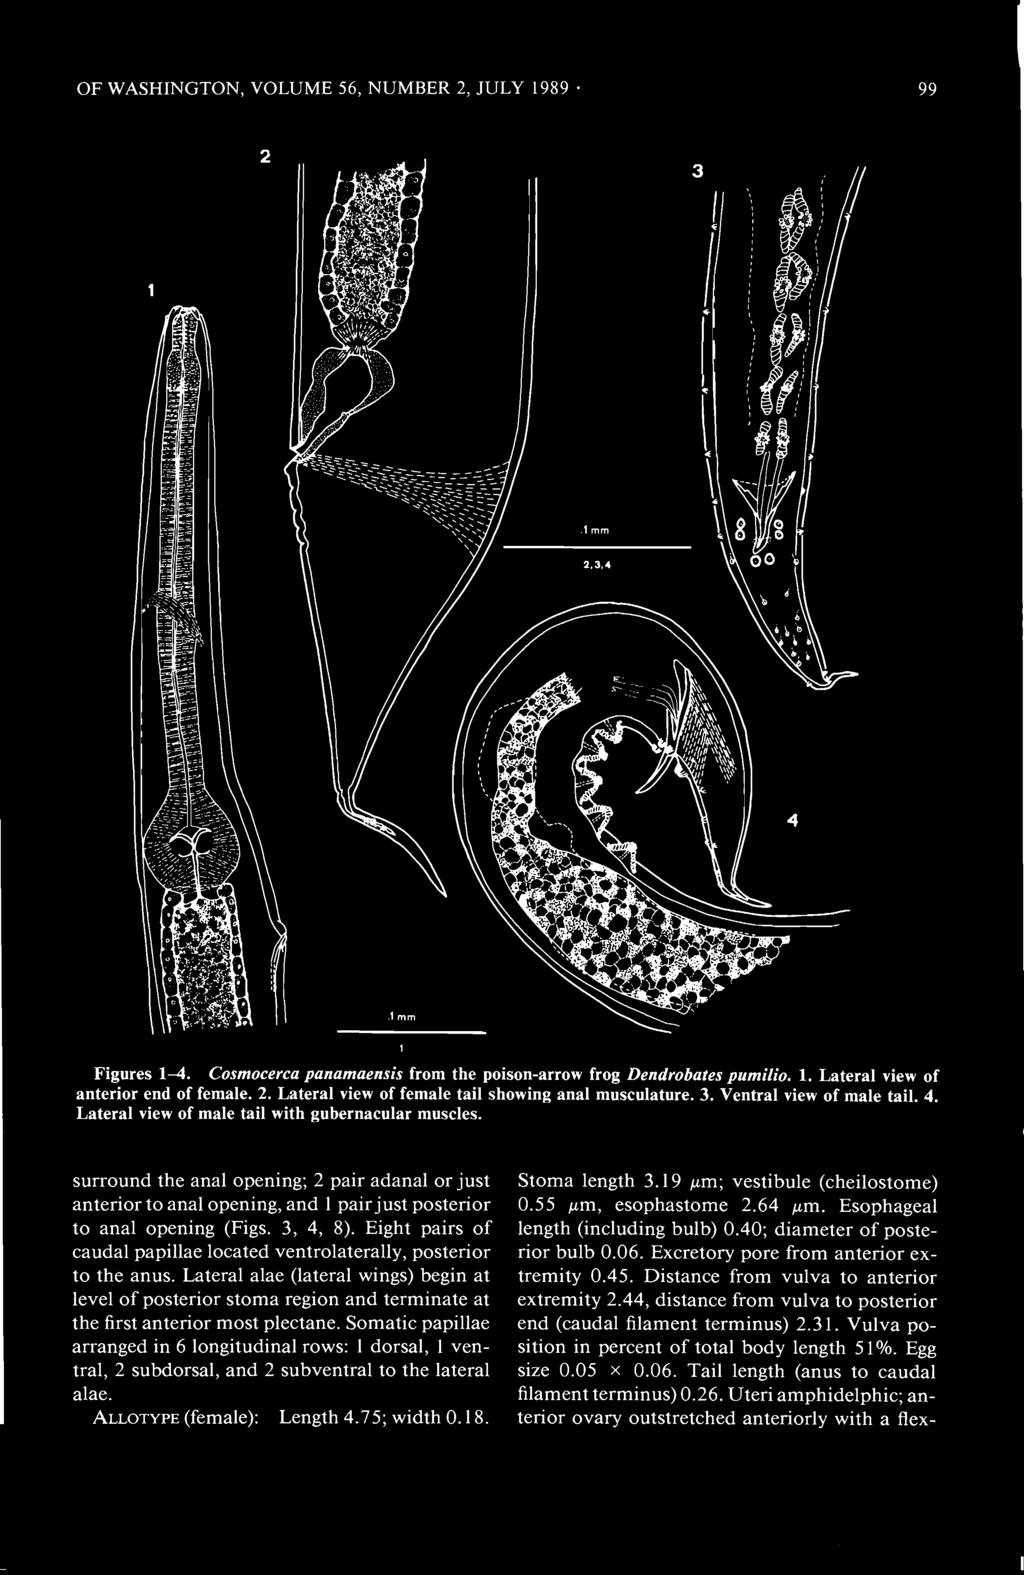 OF WASHINGTON, VOLUME 56, NUMBER 2, JULY 1989 99 Figures 1-4. Cosmocerca panamaensis from the poison-arrow frog Dendrobates pumilio, 1. Lateral view of anterior end of female. 2. Lateral view of female tail showing anal musculature.